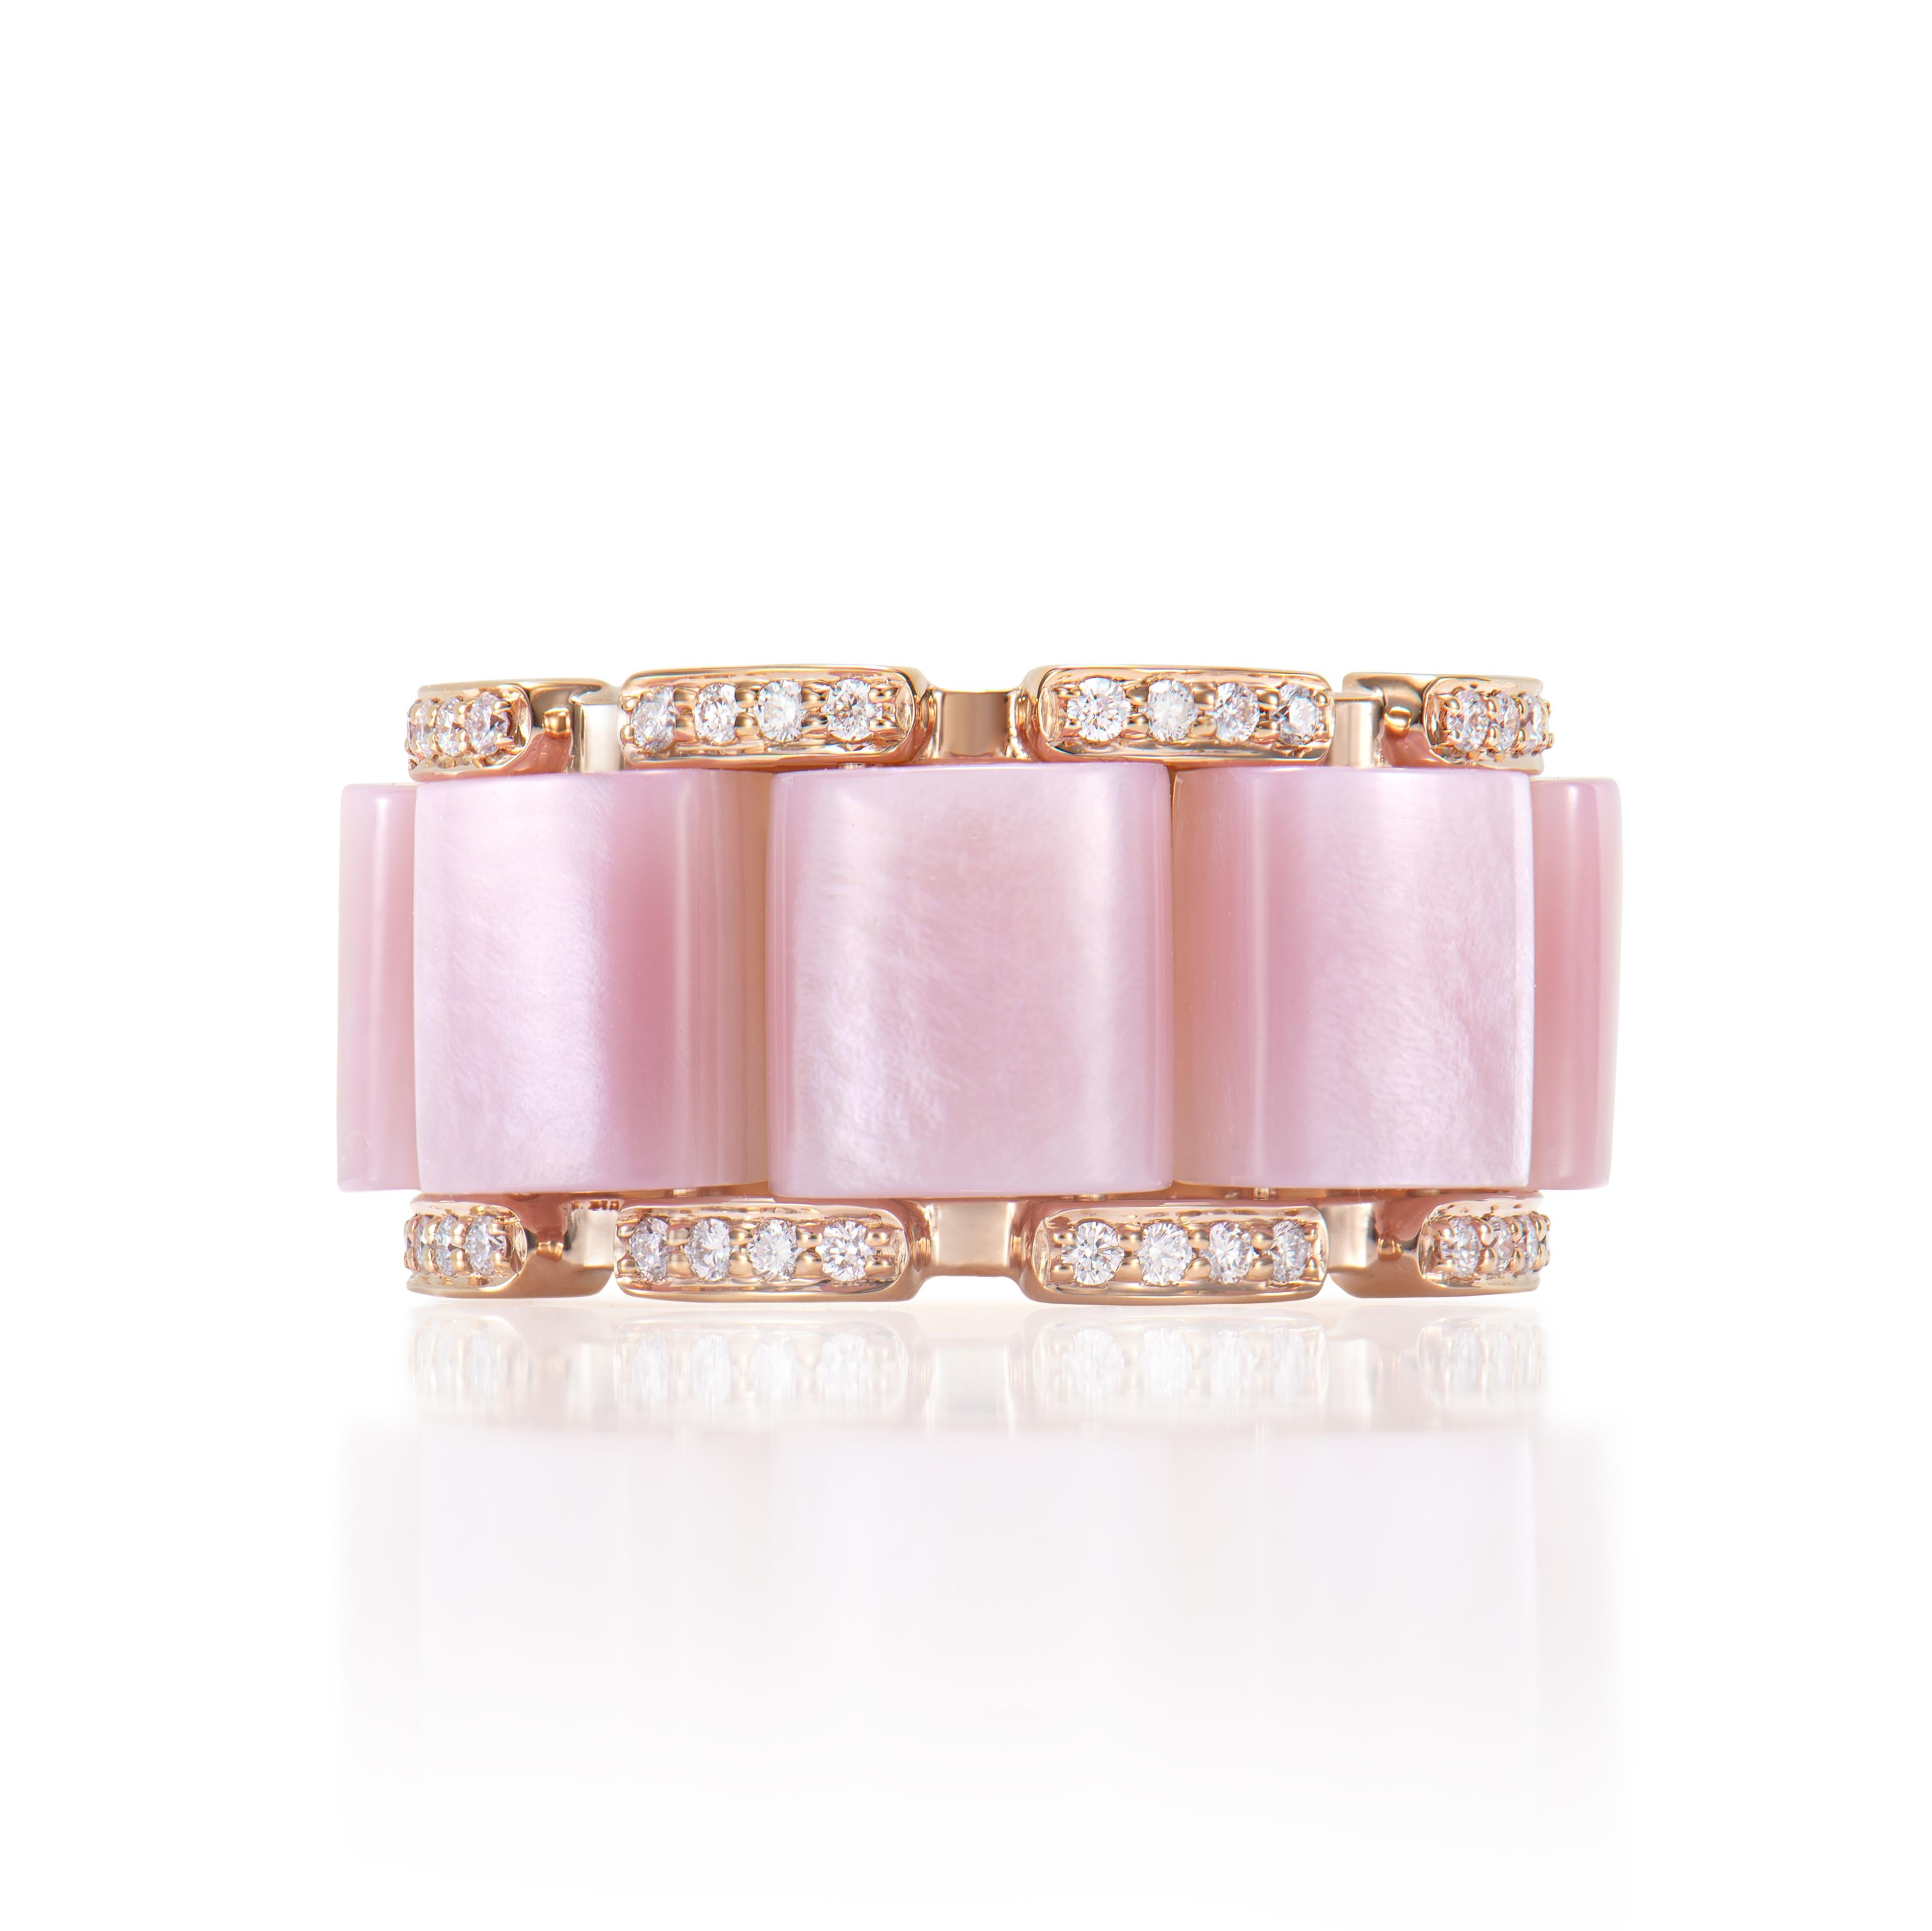 Glamorous Gemstones - Sunita Nahata started off her career as a gemstone trader, and this particular collection reflects her love for multi colored semi-precious gemstones. This is a simple yet stylish designer ring featuring pearly pink opals. Its